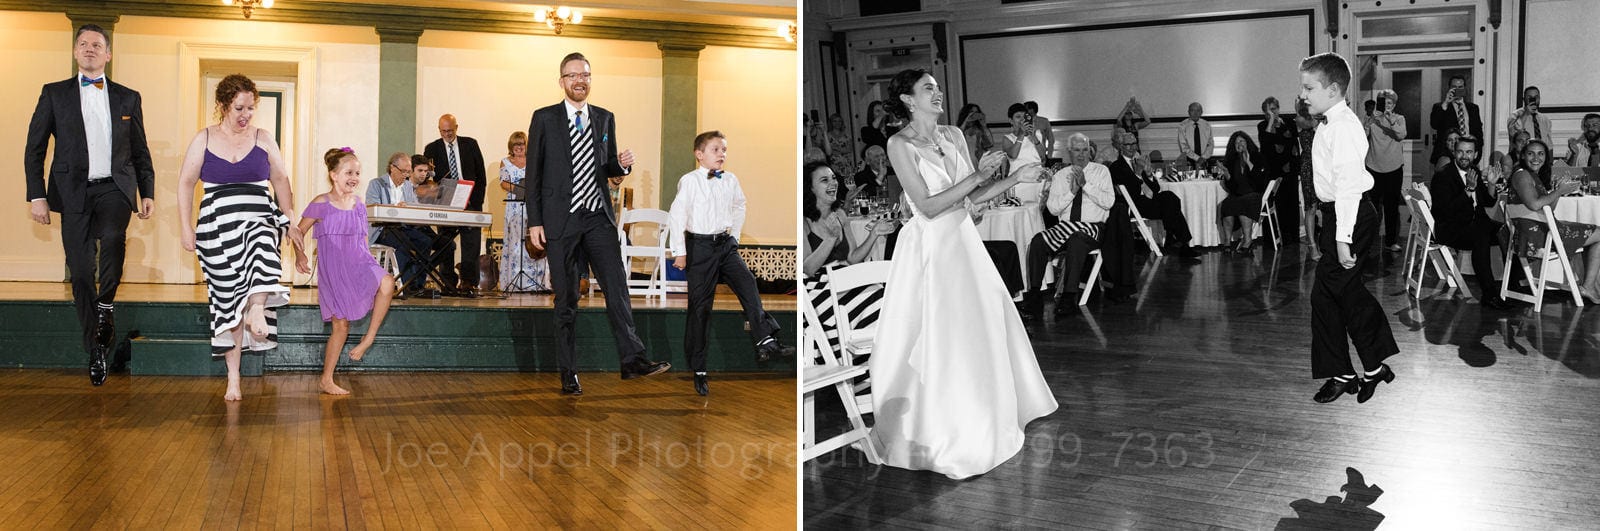 A group of people perform Irish step dance and a dancing boy jumps in the air before an applauding bride Soldiers and Sailors Wedding Photos.